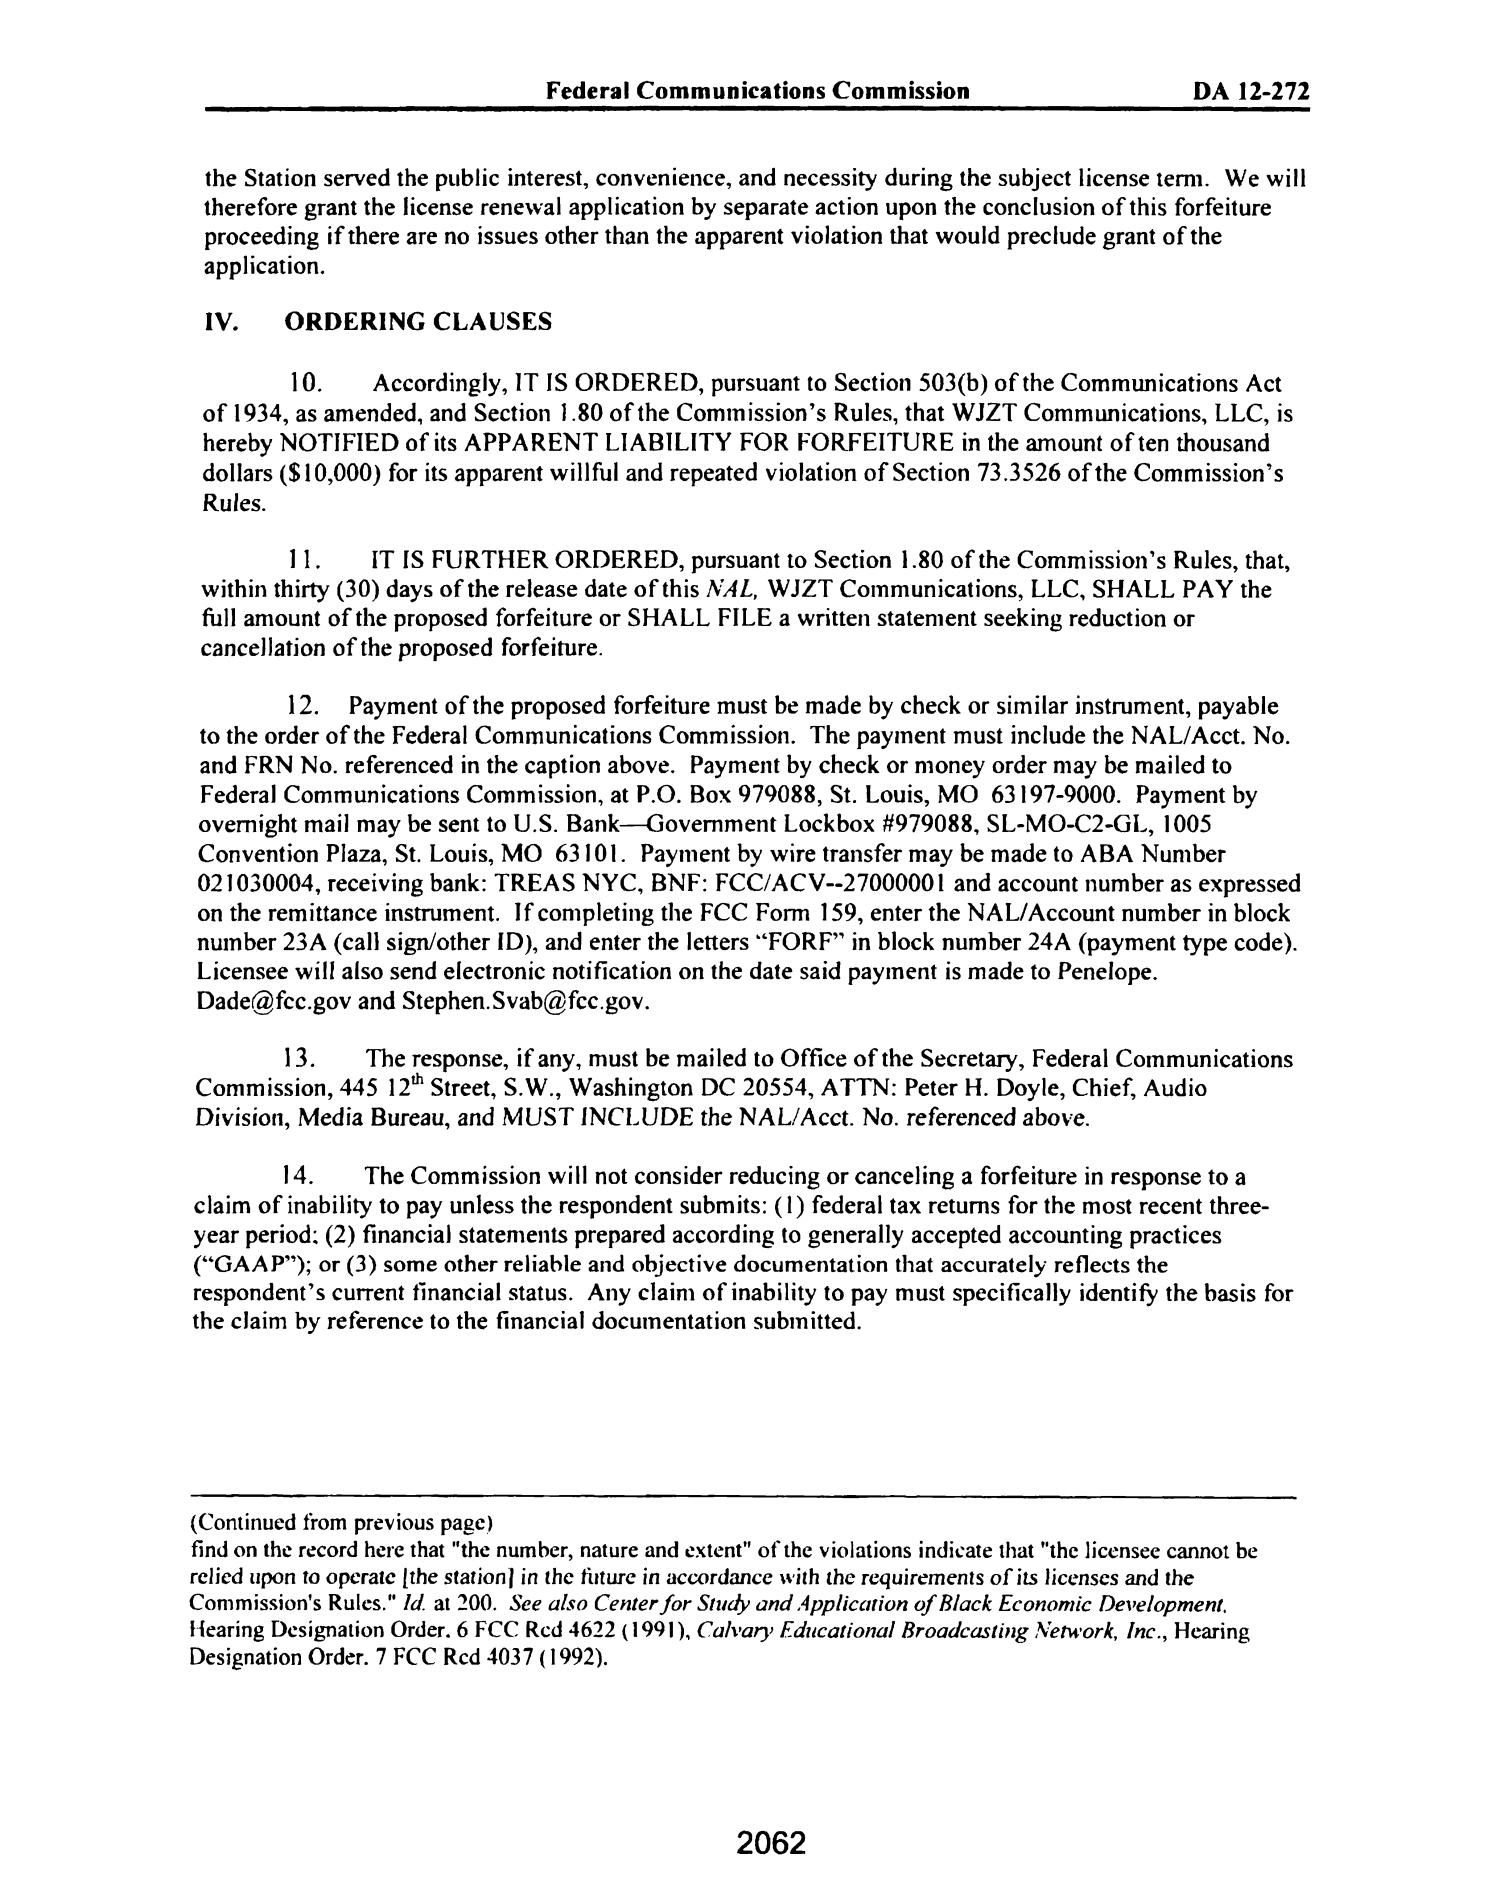 FCC Record, Volume 27, No. 3, Pages 1878 to 2785, February 21 - March 16, 2012
                                                
                                                    2062
                                                